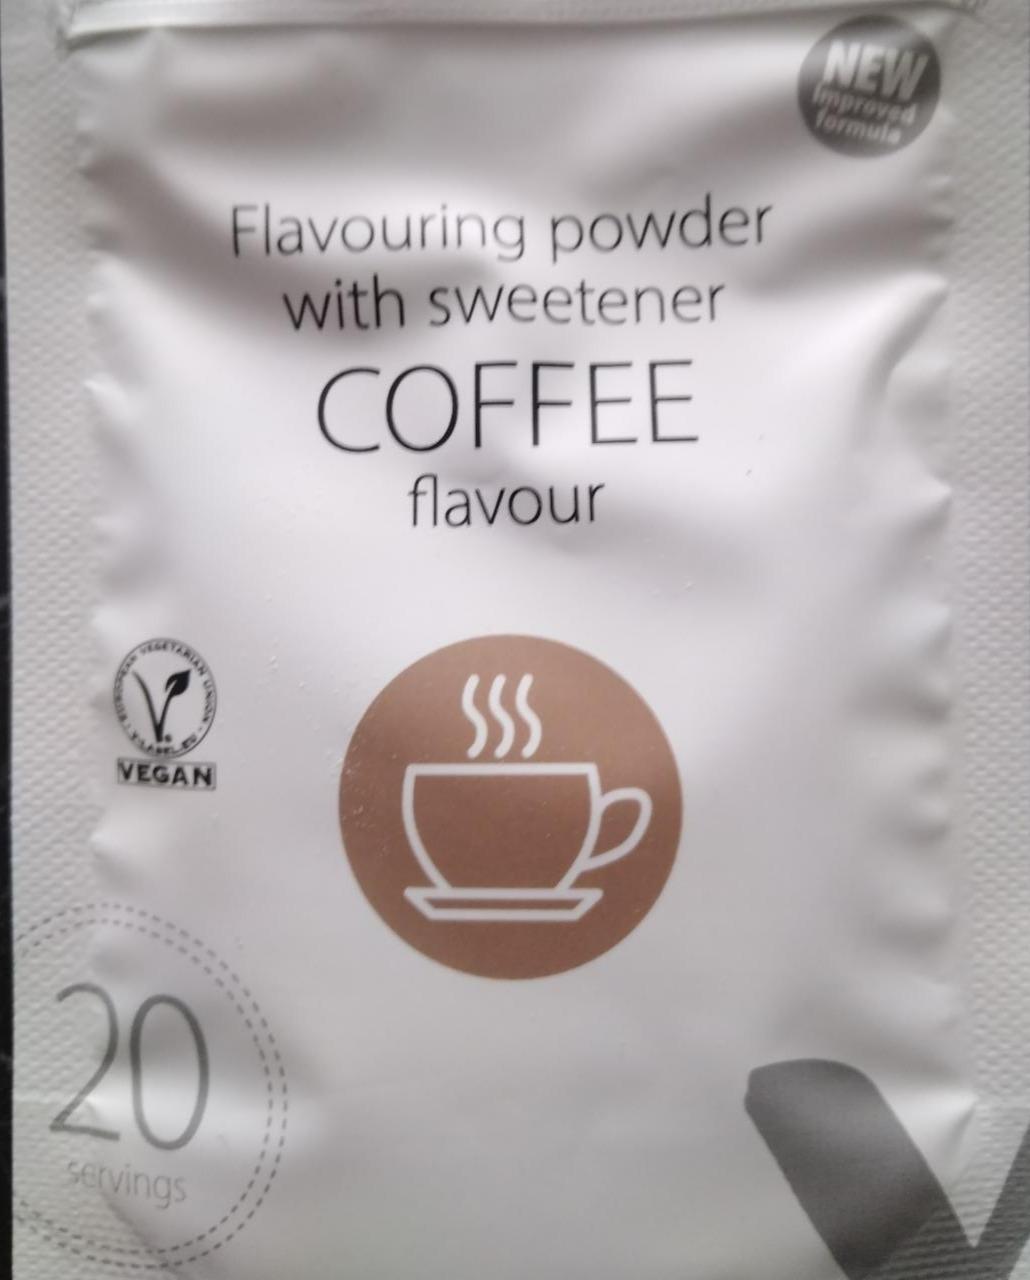 Fotografie - Flavouring powder with sweetener Coffee flavour KetoMix